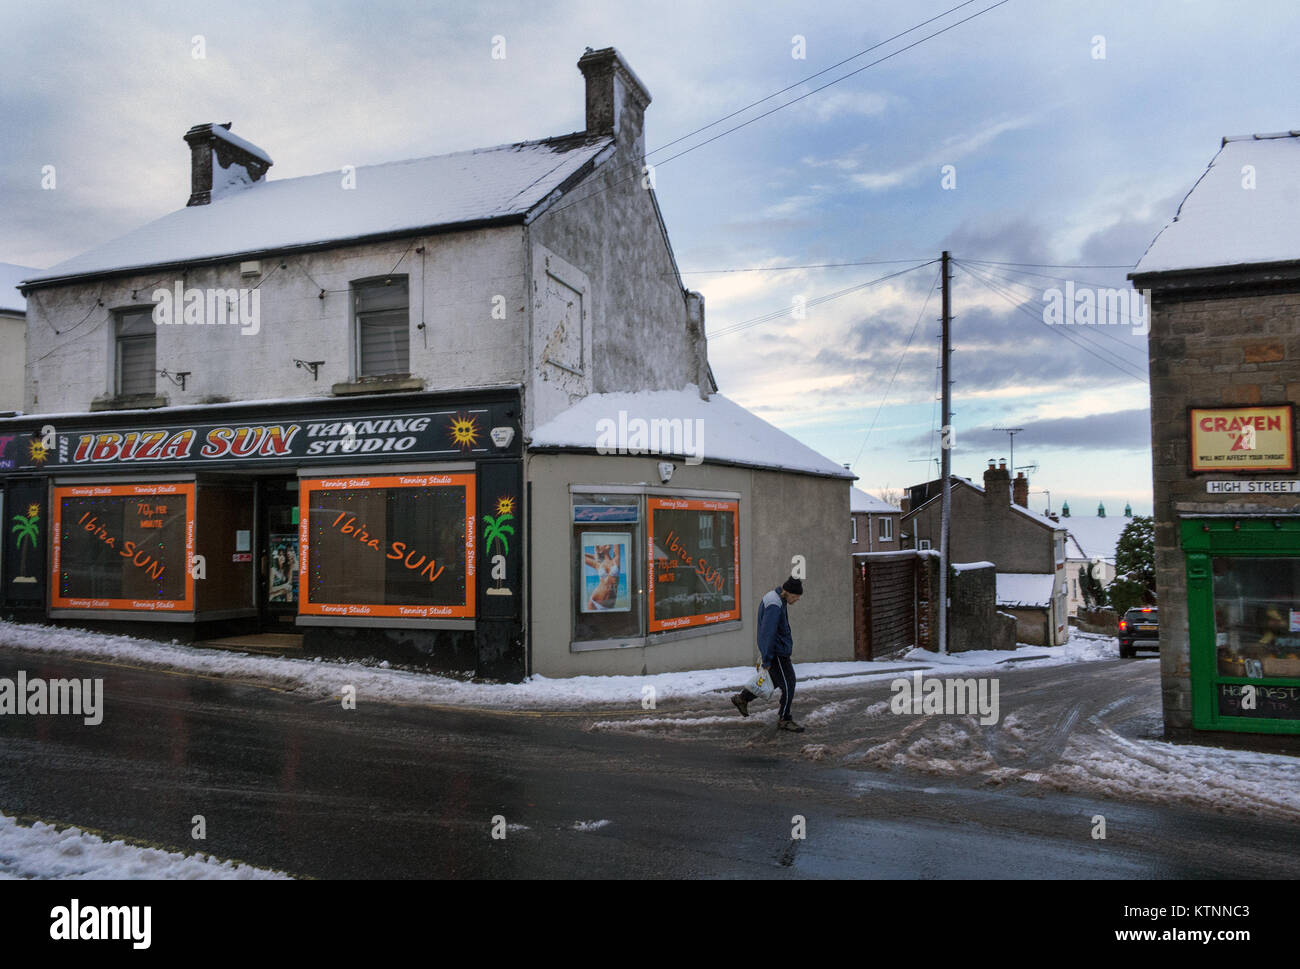 Cinderford, Gloucestershire, UK. 27th Dec, 2017. Snow came to parts of the UK today, this is a scene from Cinderford in the  Forest Of Dean.  Despite  the weather disrupting holiday air traffic, locals here enjoyed 'Ibiza Sun' on Cinderford High Street . Credit: DAVID BARRETT/Alamy Live News Stock Photo